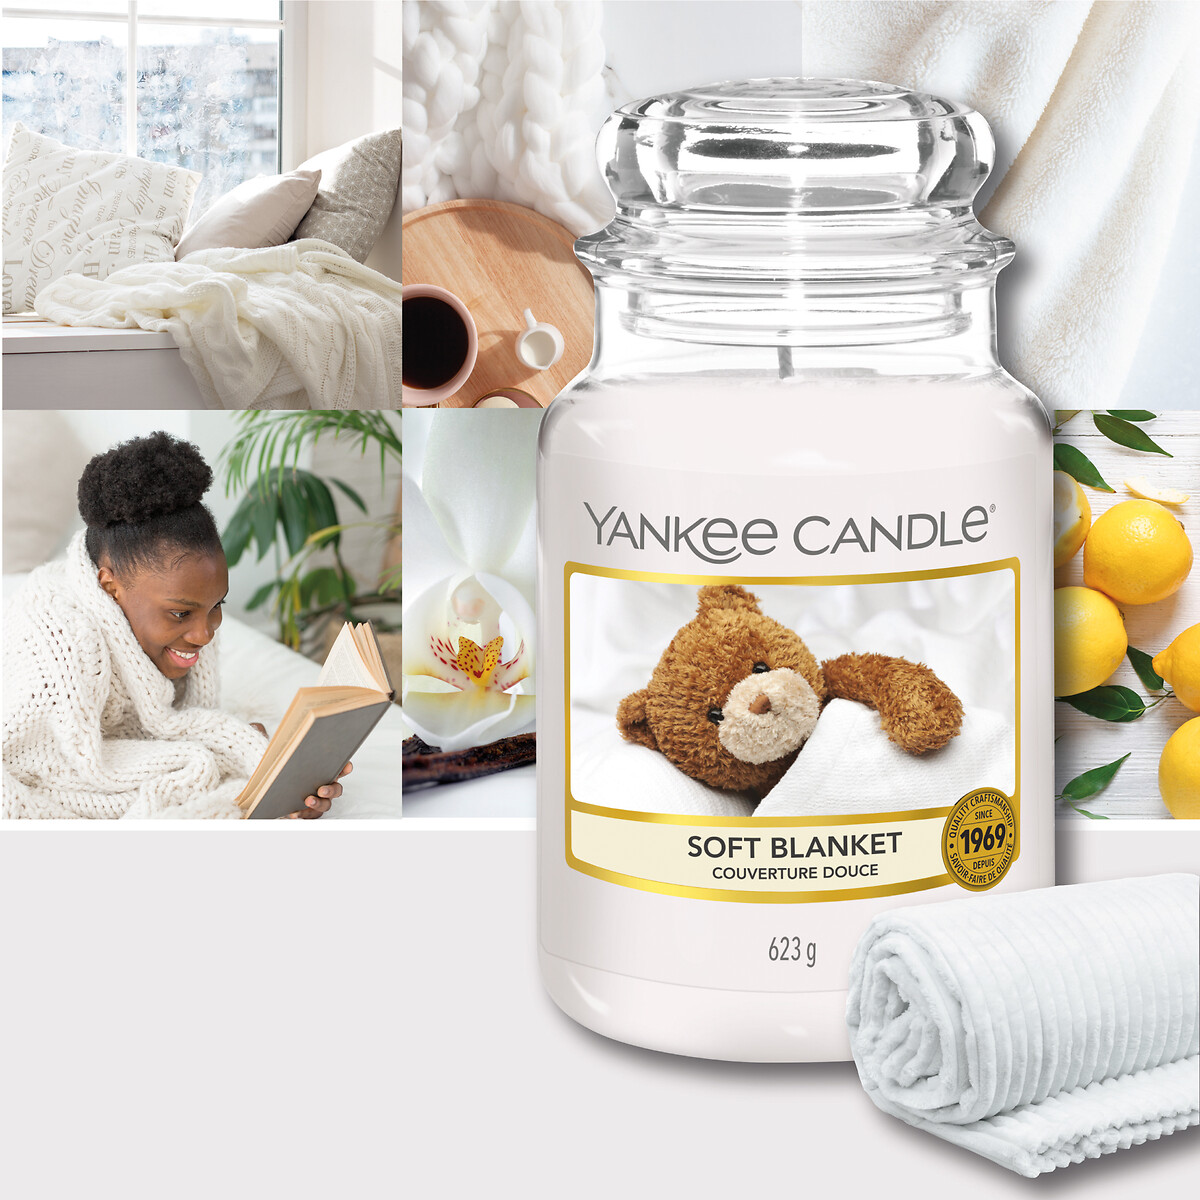 Yankee Candles Soft Blanket - Reviews